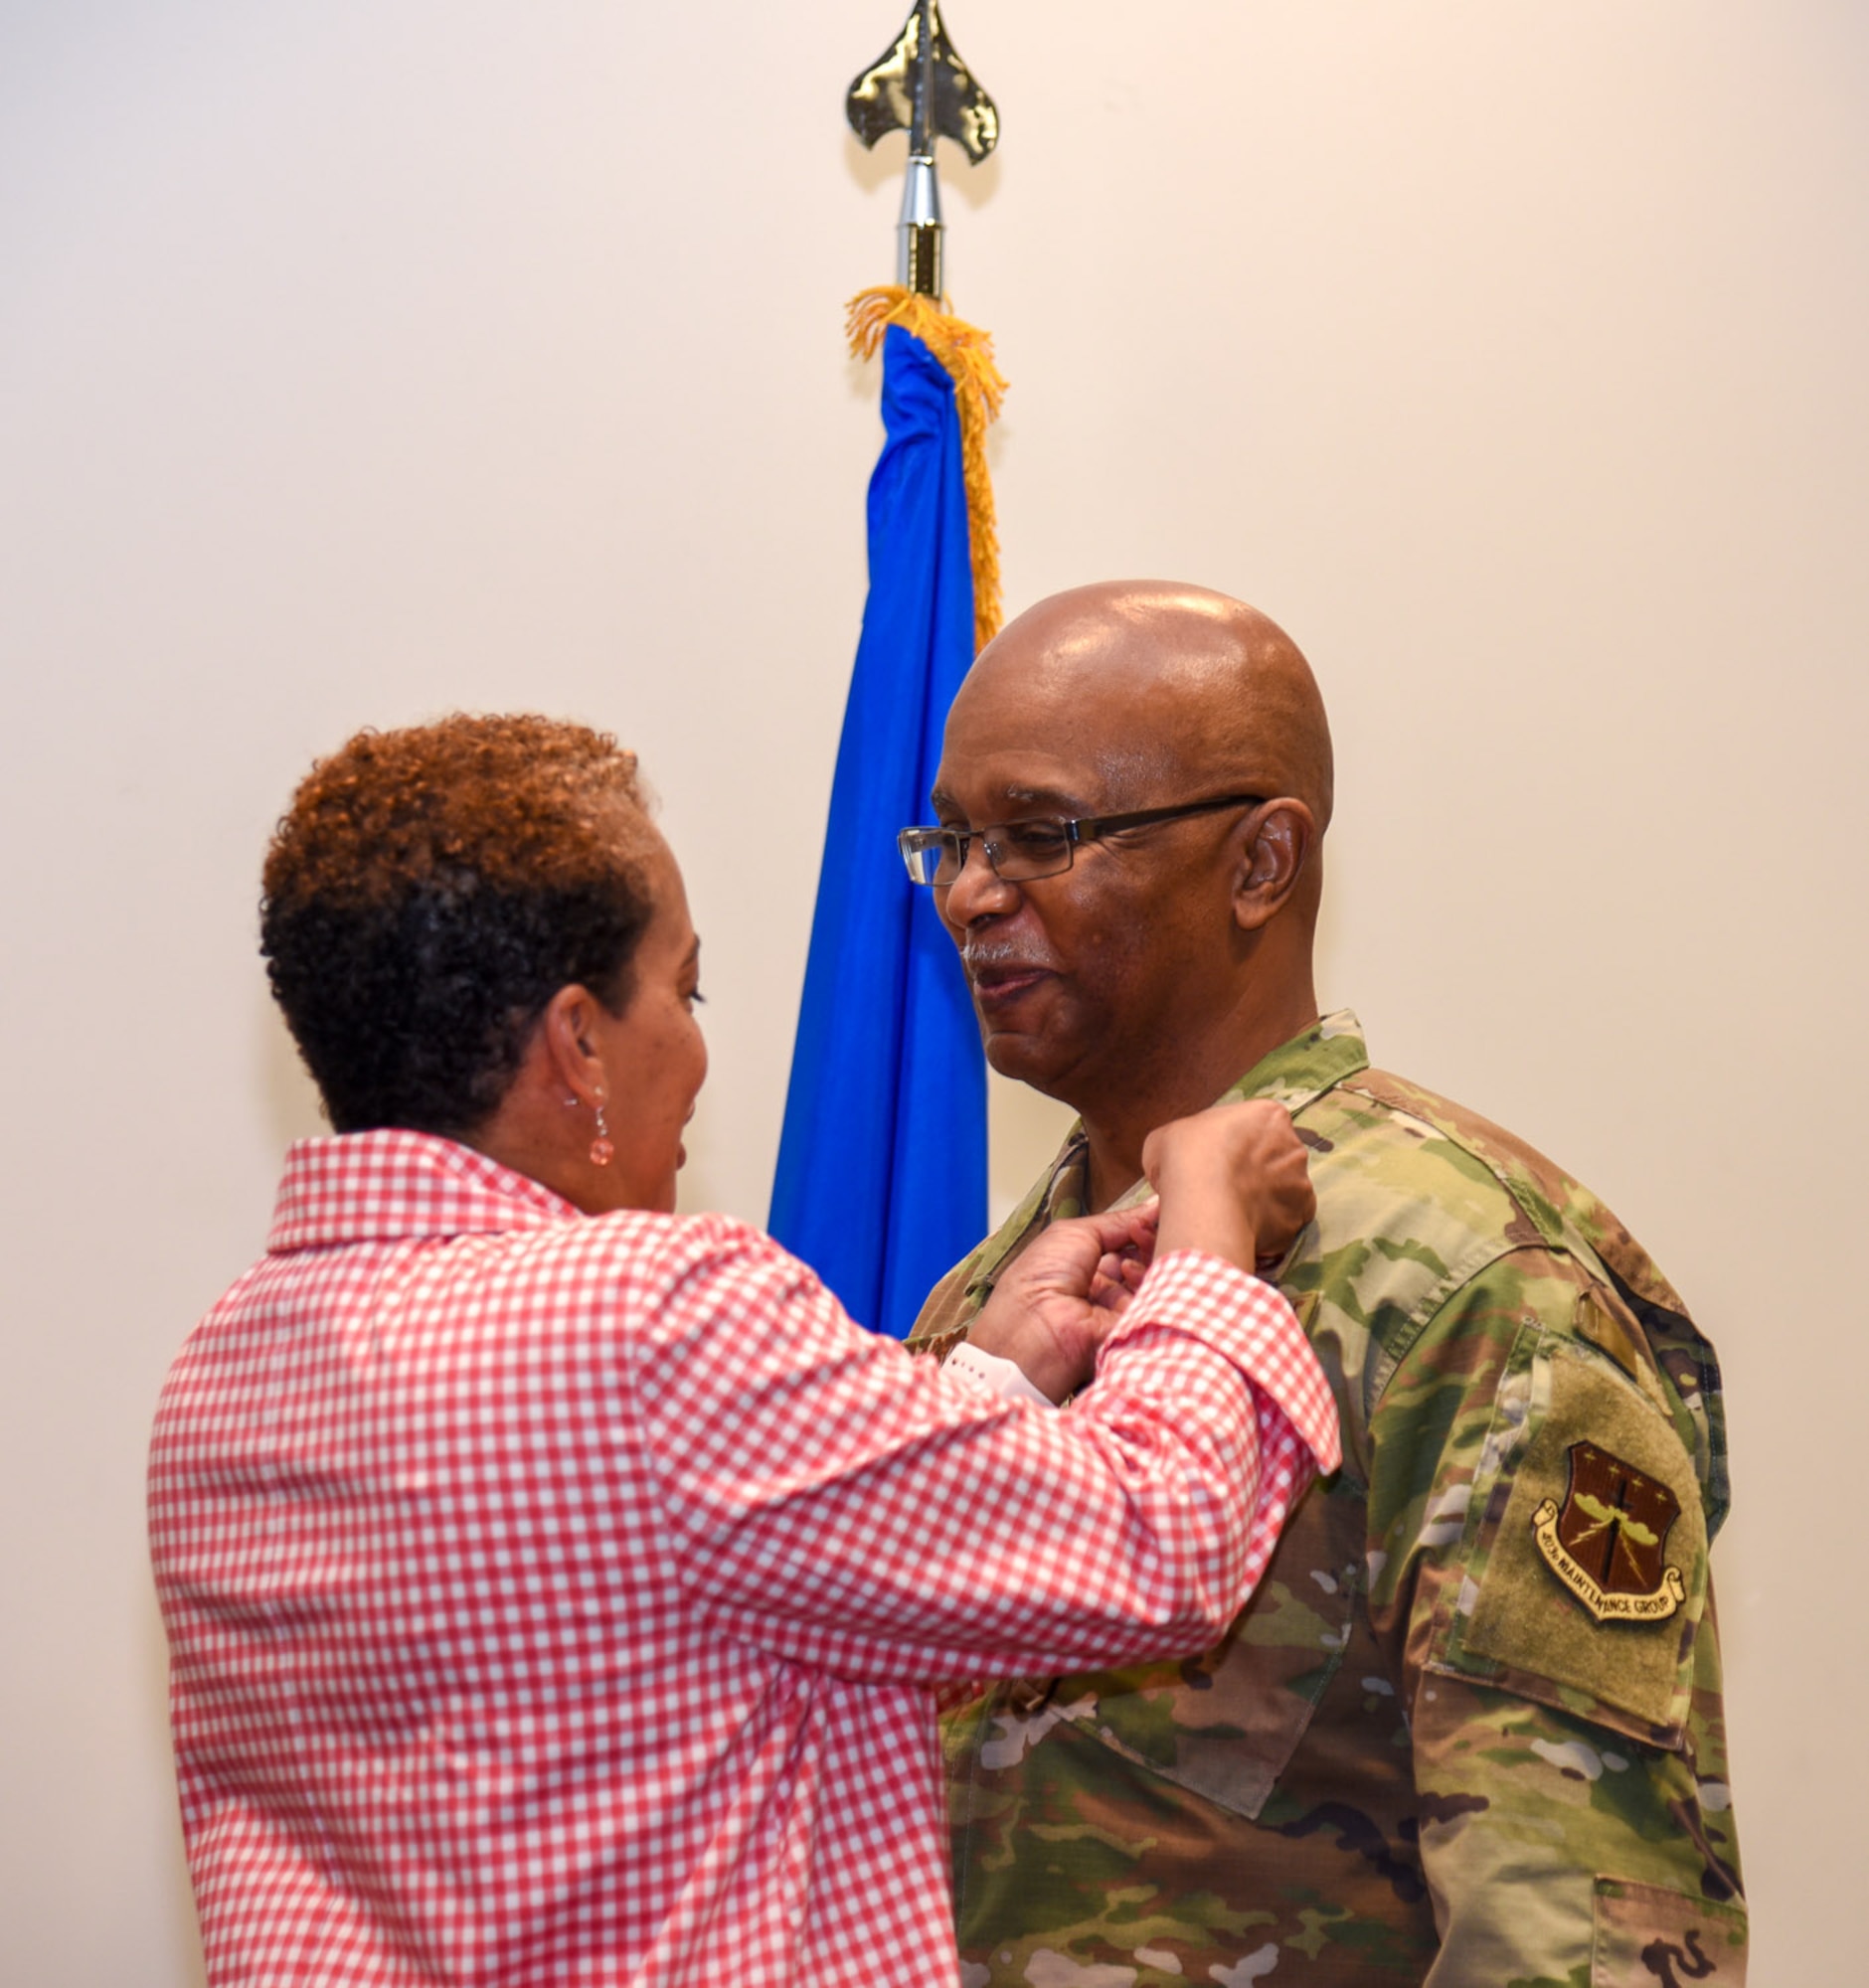 Chief Master Sgt. Marshall O. Harris, Jr., 403rd Maintenance Group quality assurance superintendent, stands as his wife Sharon pins a medal to his lapel during his retirement ceremony April 6, 2019 at the Roberts Maintenance Facility here. Harris said he has the support of his wife to thank for getting him through his Air Force career. (U.S. Air Force photo by Senior Airman Kristen Pittman)